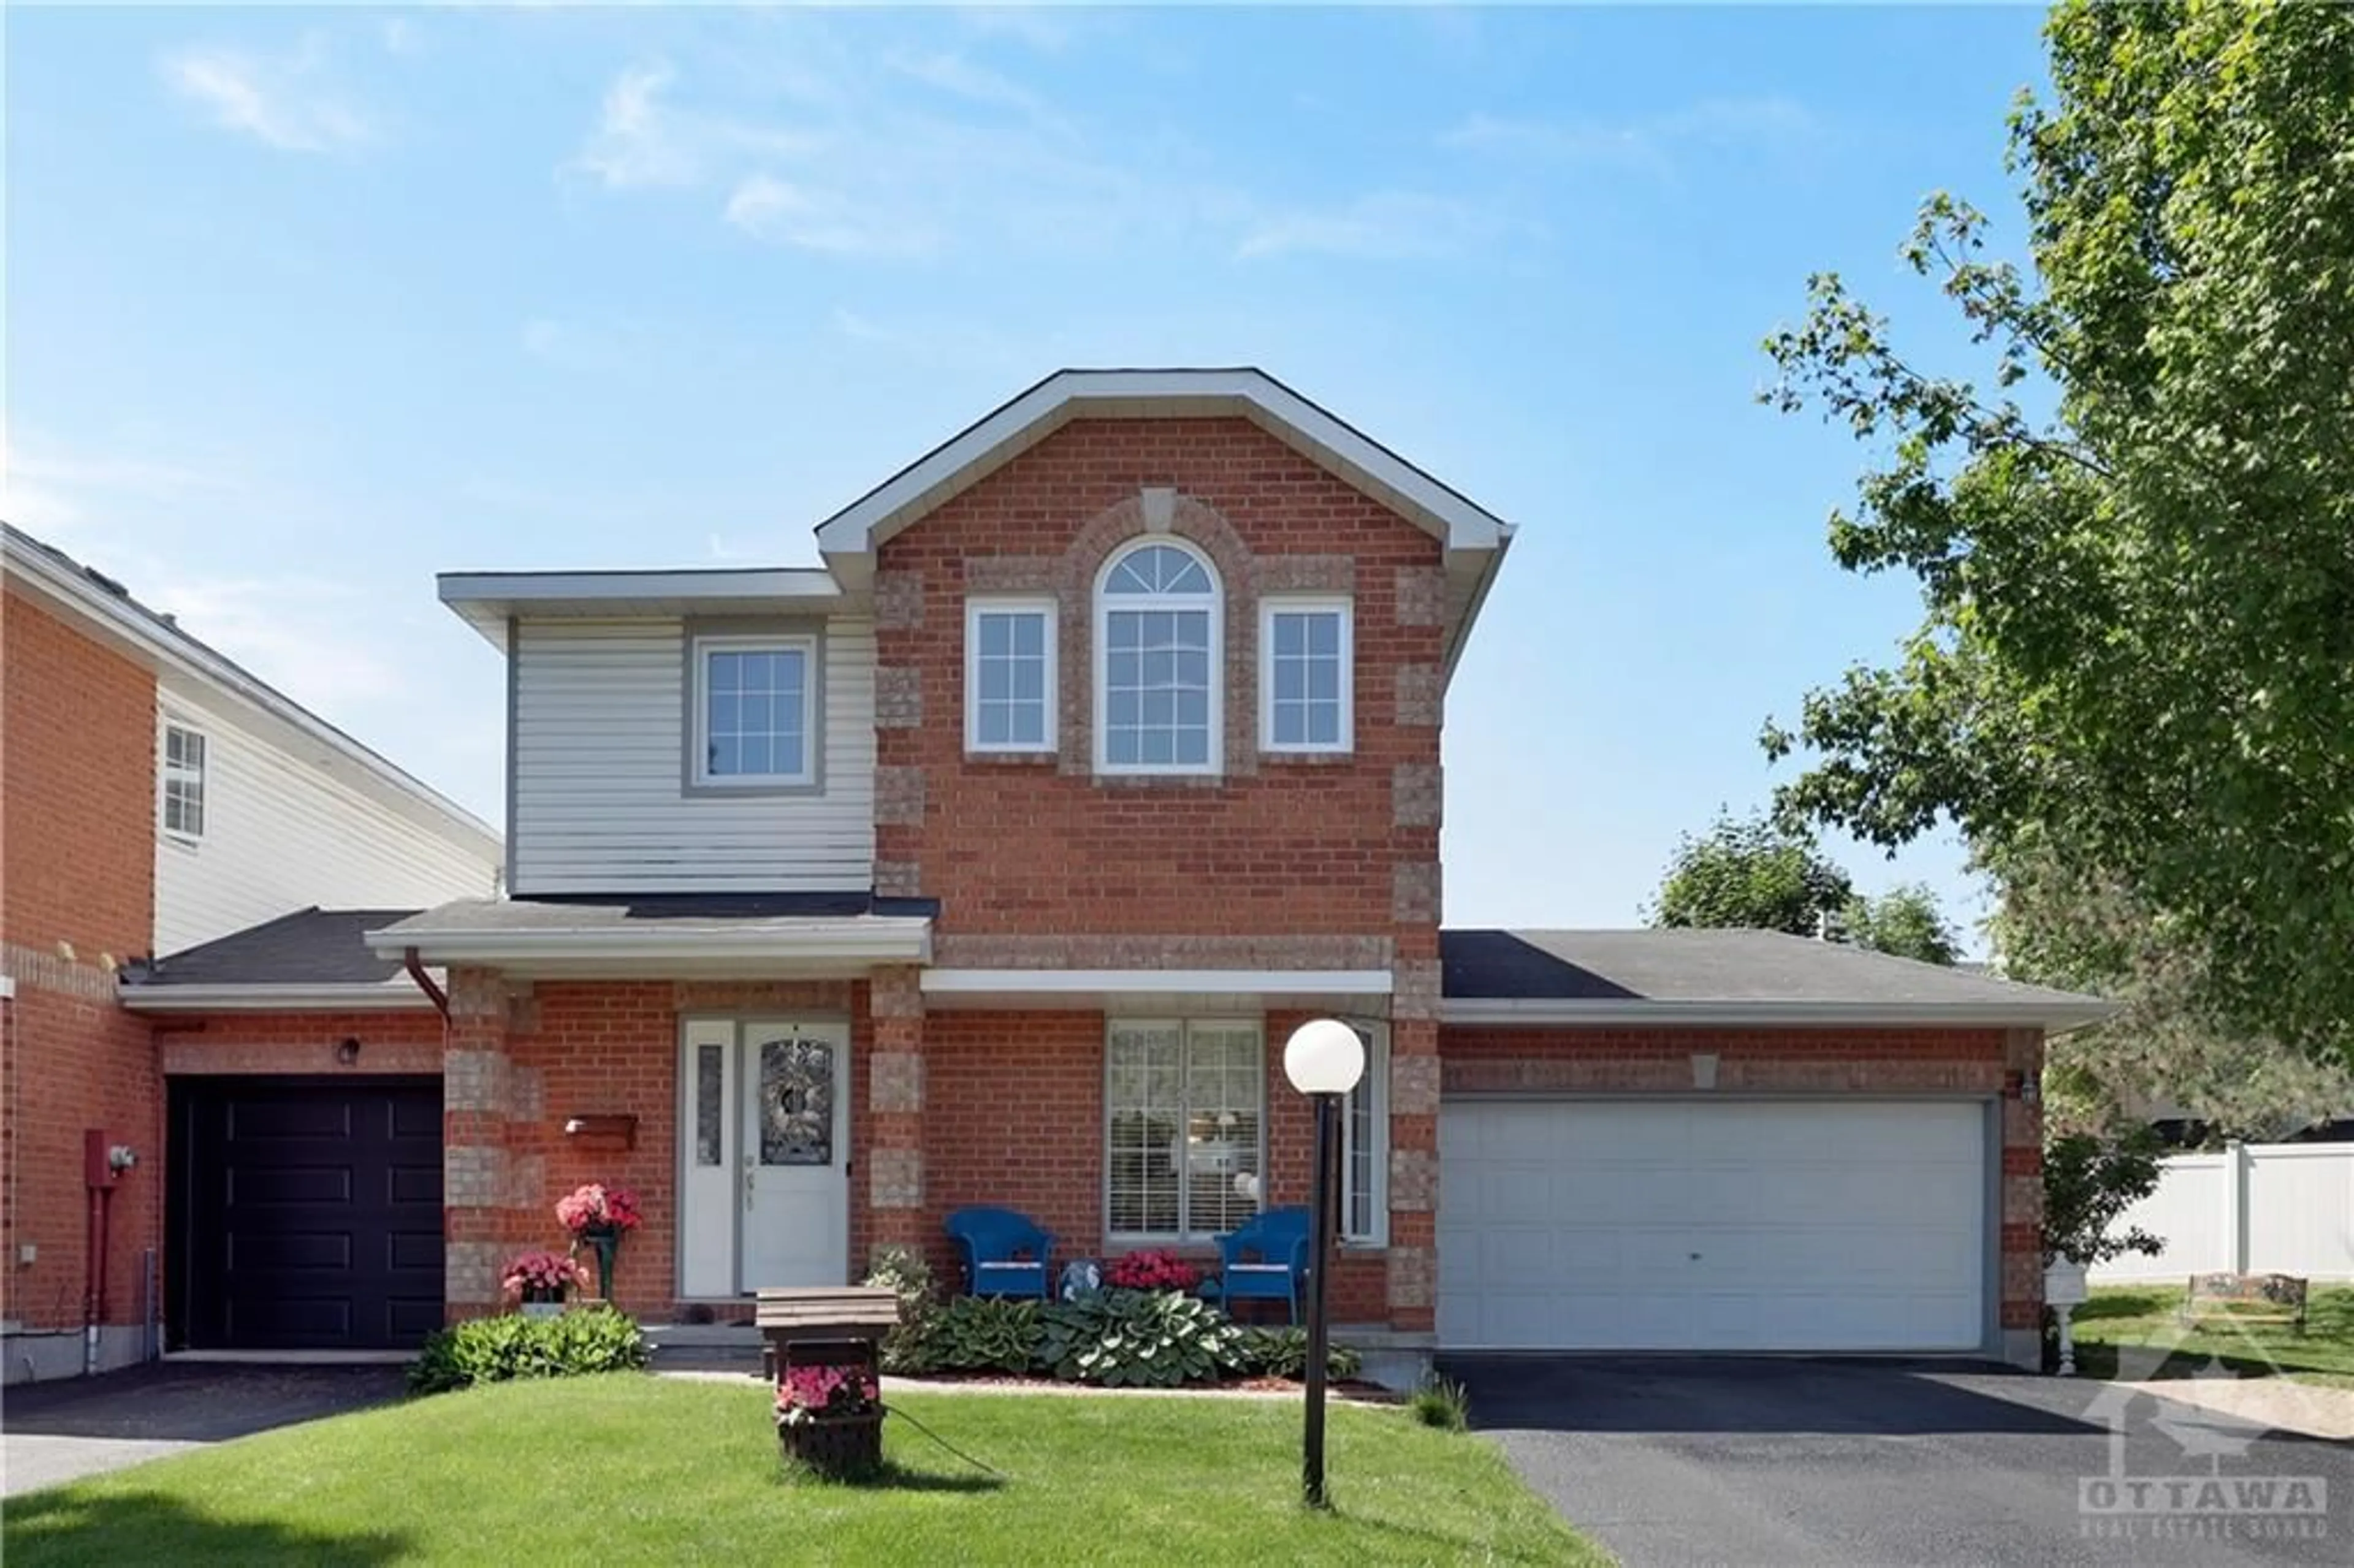 Home with brick exterior material for 127 BRIDLEWOOD Dr, Ottawa Ontario K2M 2G6